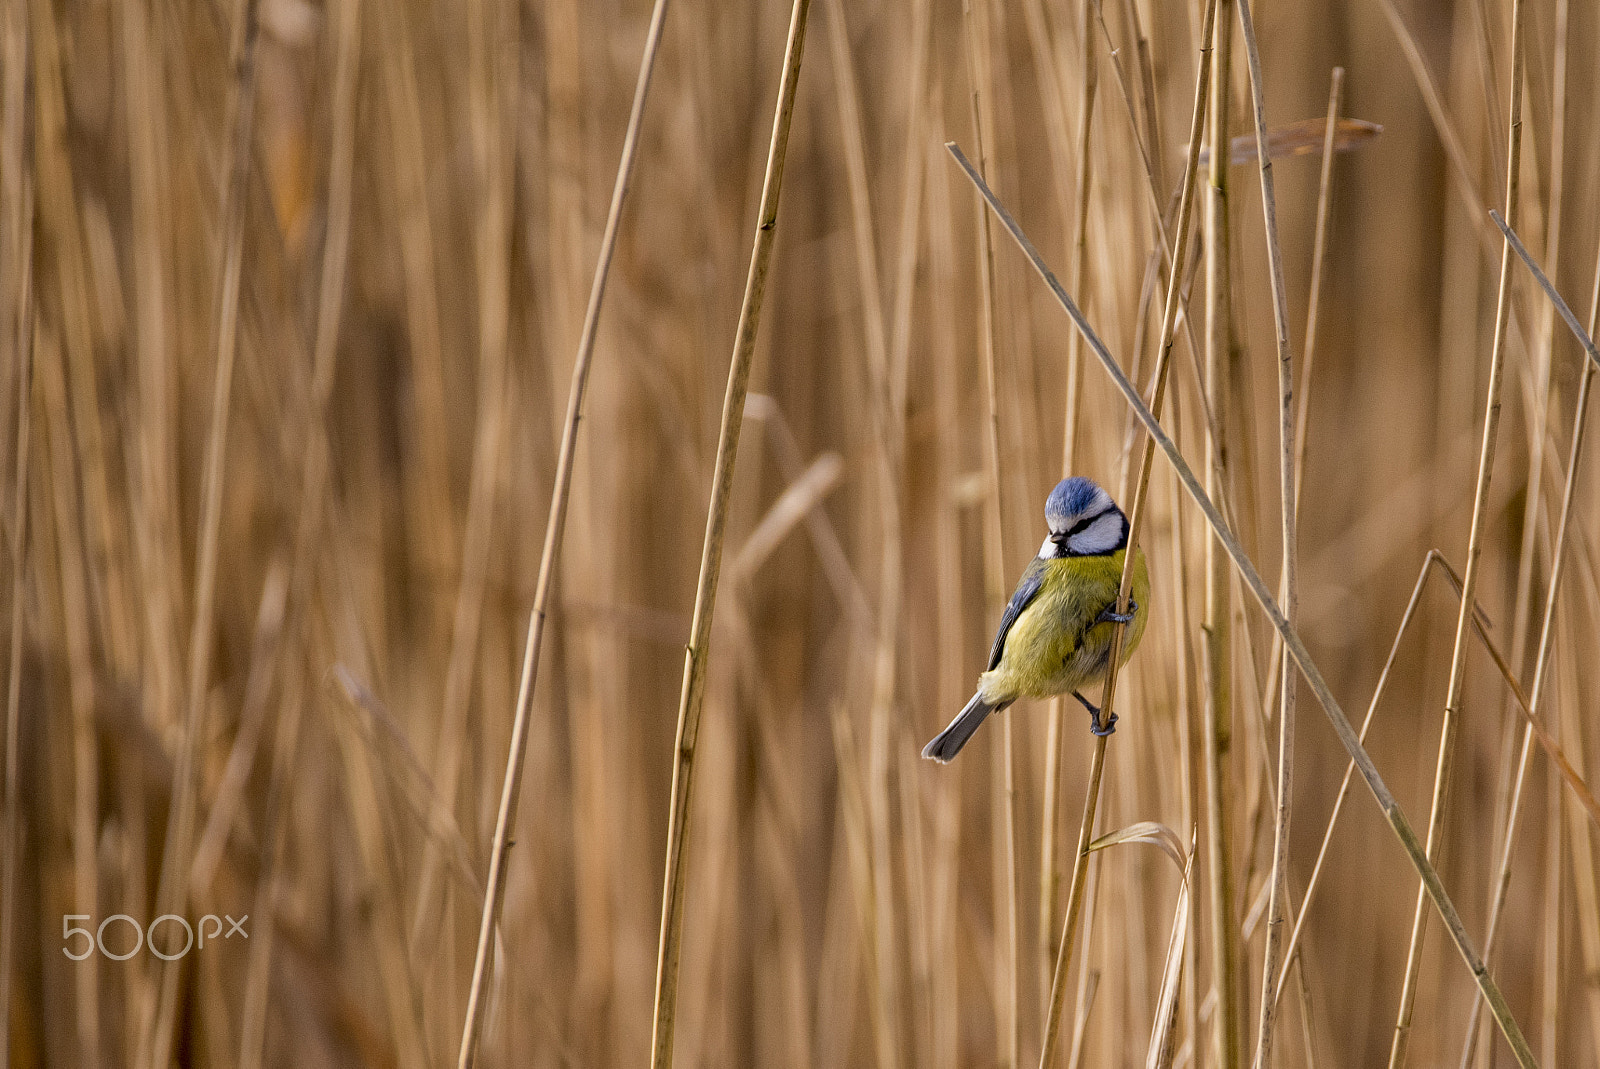 Nikon D750 + Sigma 150-600mm F5-6.3 DG OS HSM | C sample photo. Blue tit in the reeds photography